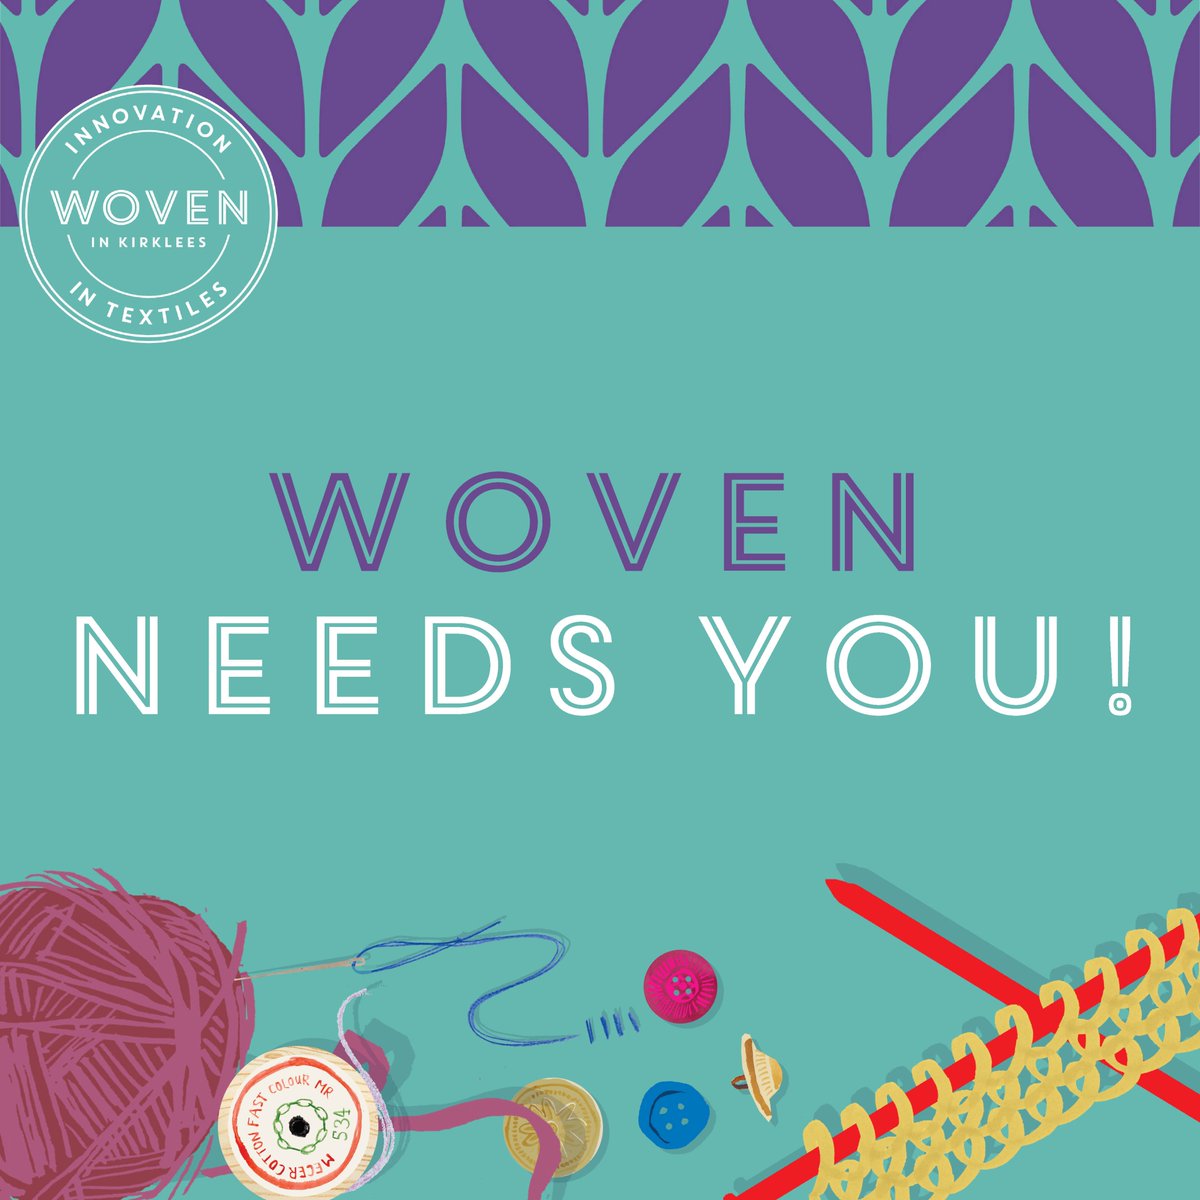 **Calling all those working in the textiles industry/textiles business owners** We'd like to know what you think of #WOVENinKirklees, & what you'd like from the festival in the future. Please fill out our short online survey: hatchprojects.wufoo.com/forms/m1xc33l6…